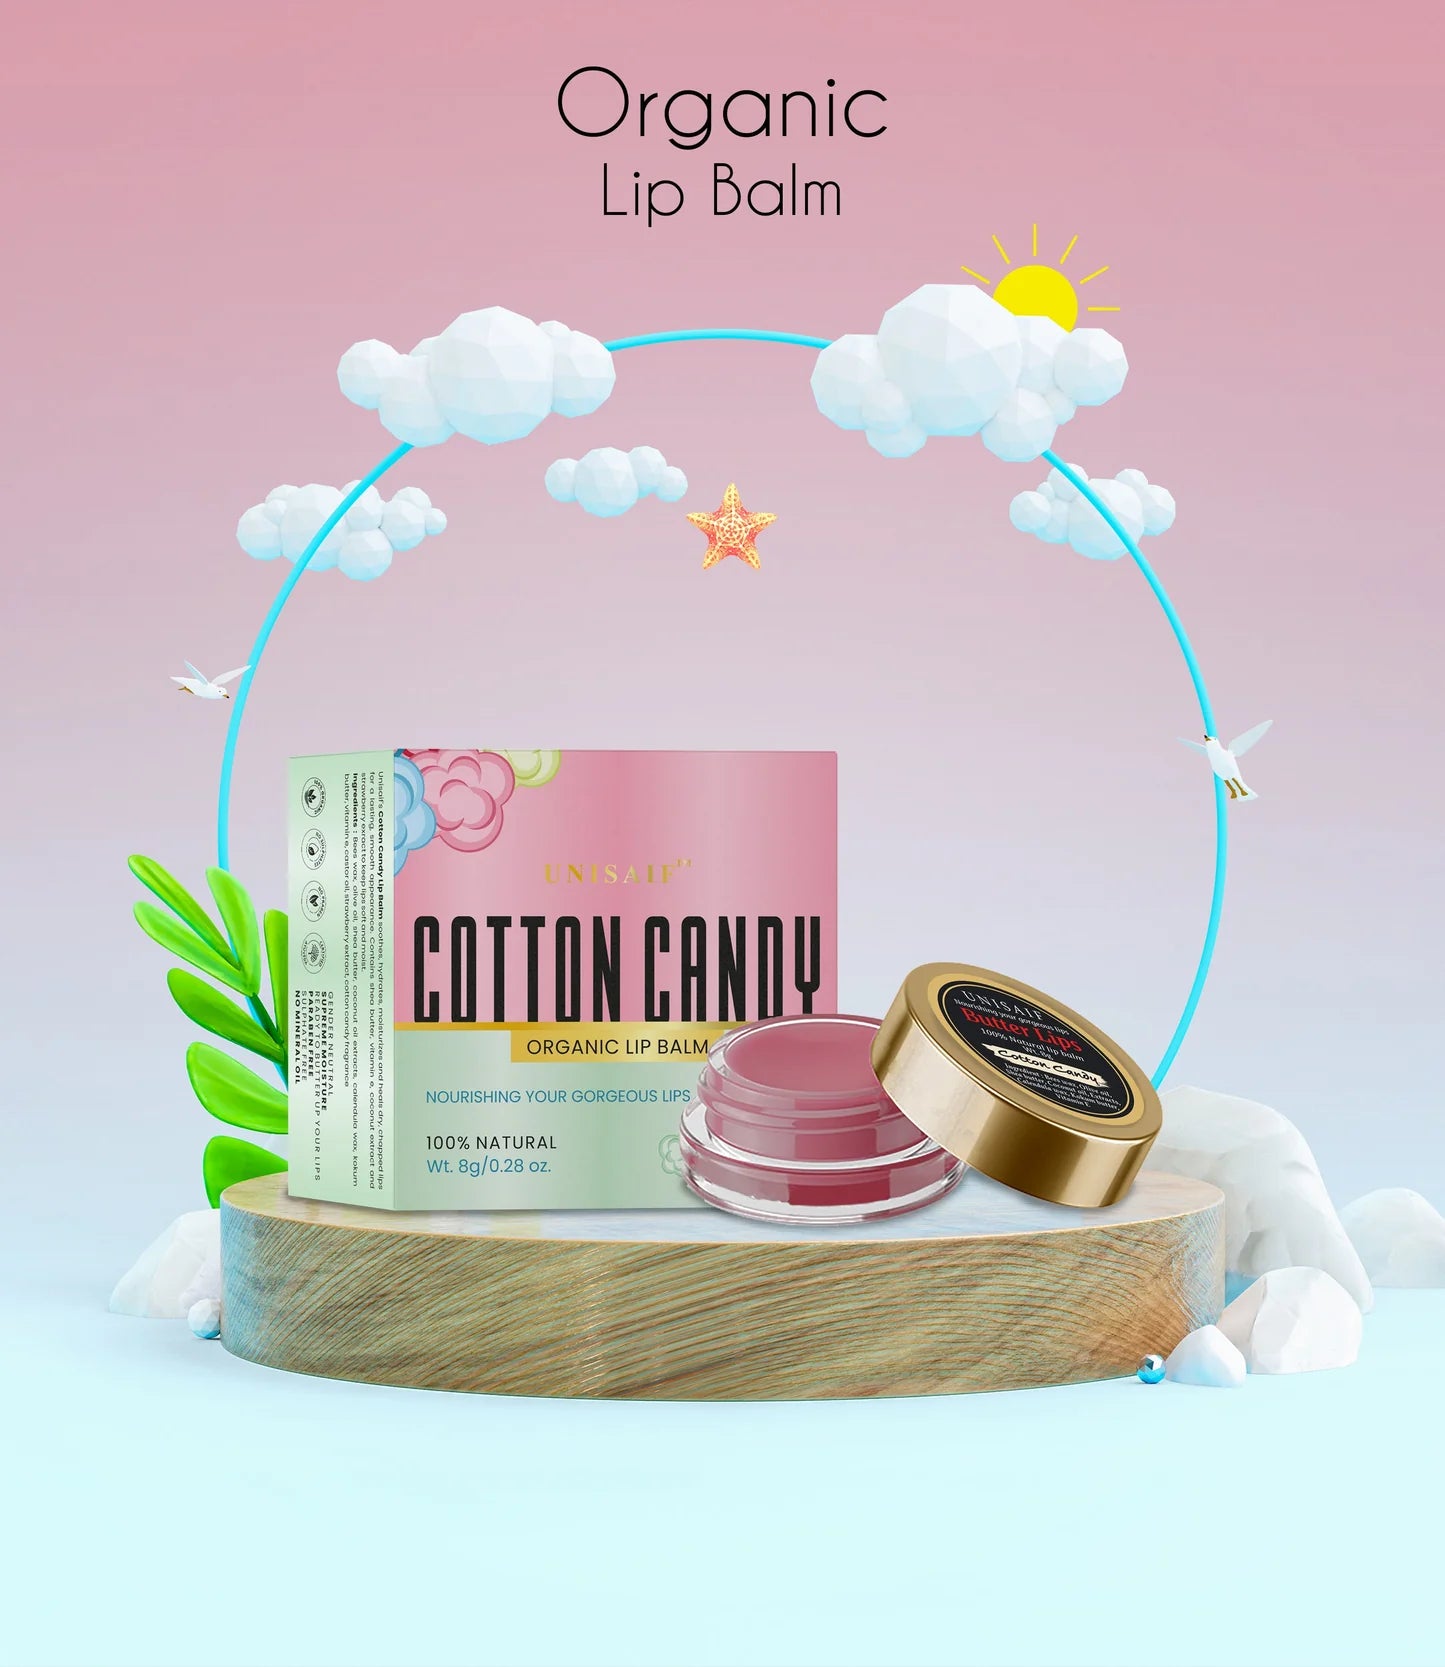 Cotton Candy Organic Butter Lip Balm (8g) Gorgeous Lips | 100% Natural | Mineral Oil Free